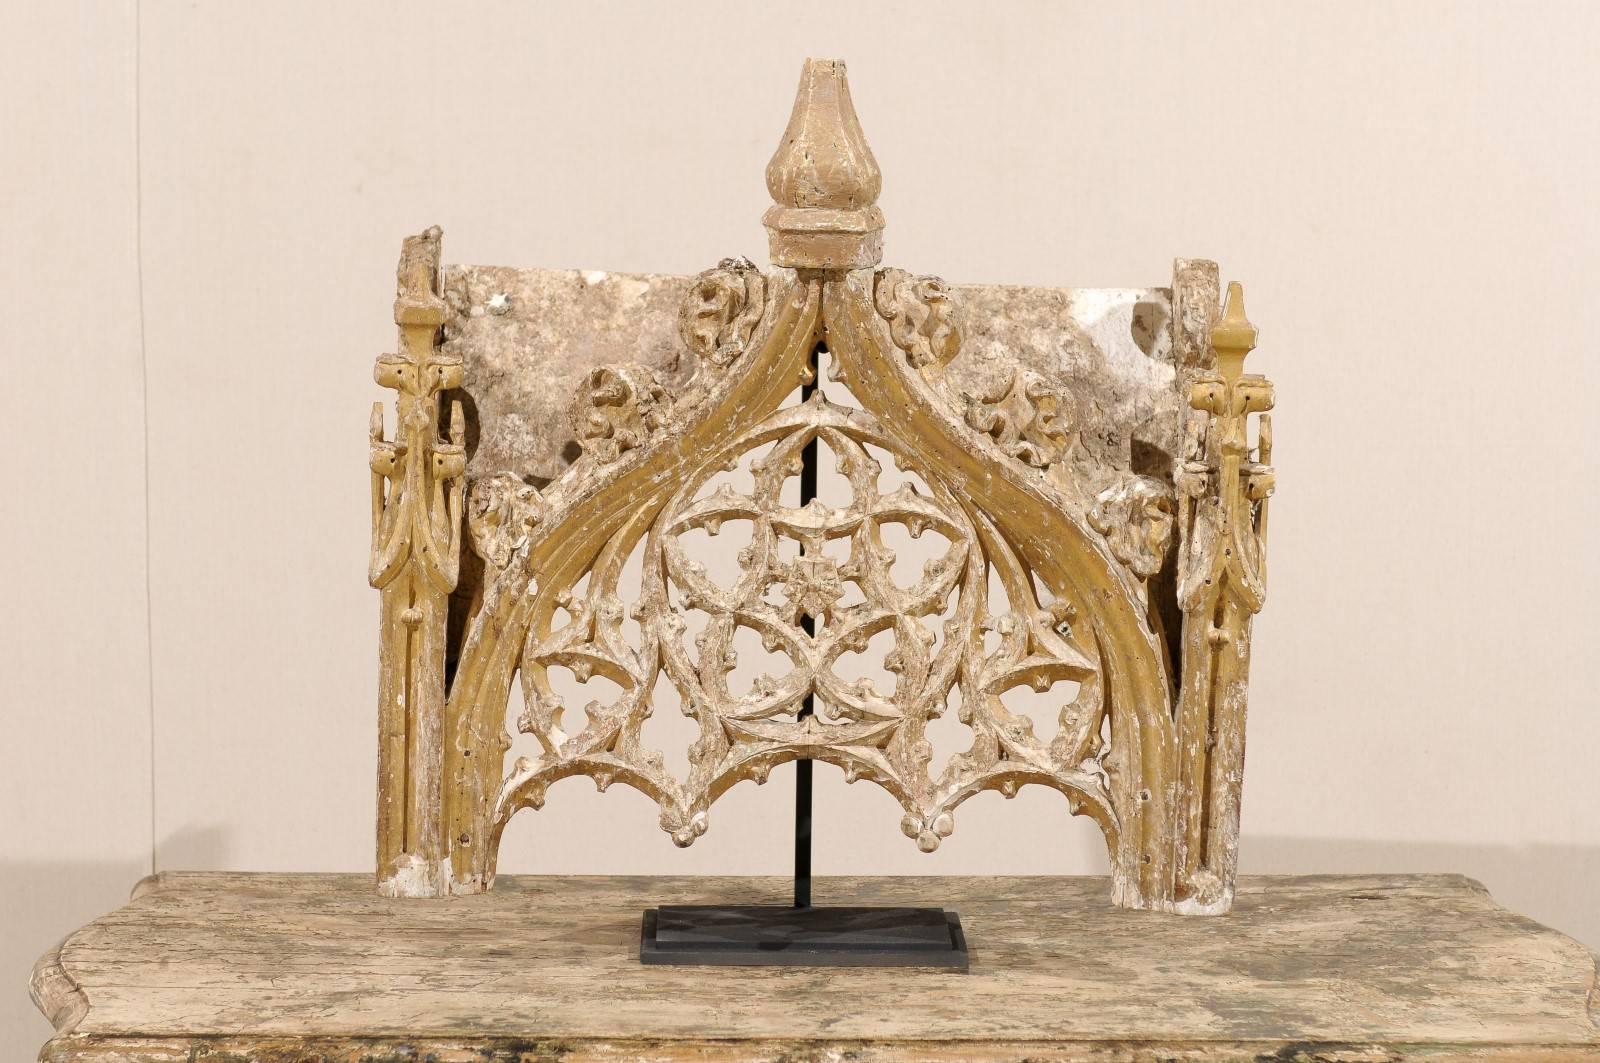 An 18th century Italian fragment on stand. This Italian fragment from the late 18th century is gilded over gesso and wood with great intricate carving details throughout reminiscent of the late Gothic. The pointed arch is decorated in its center by